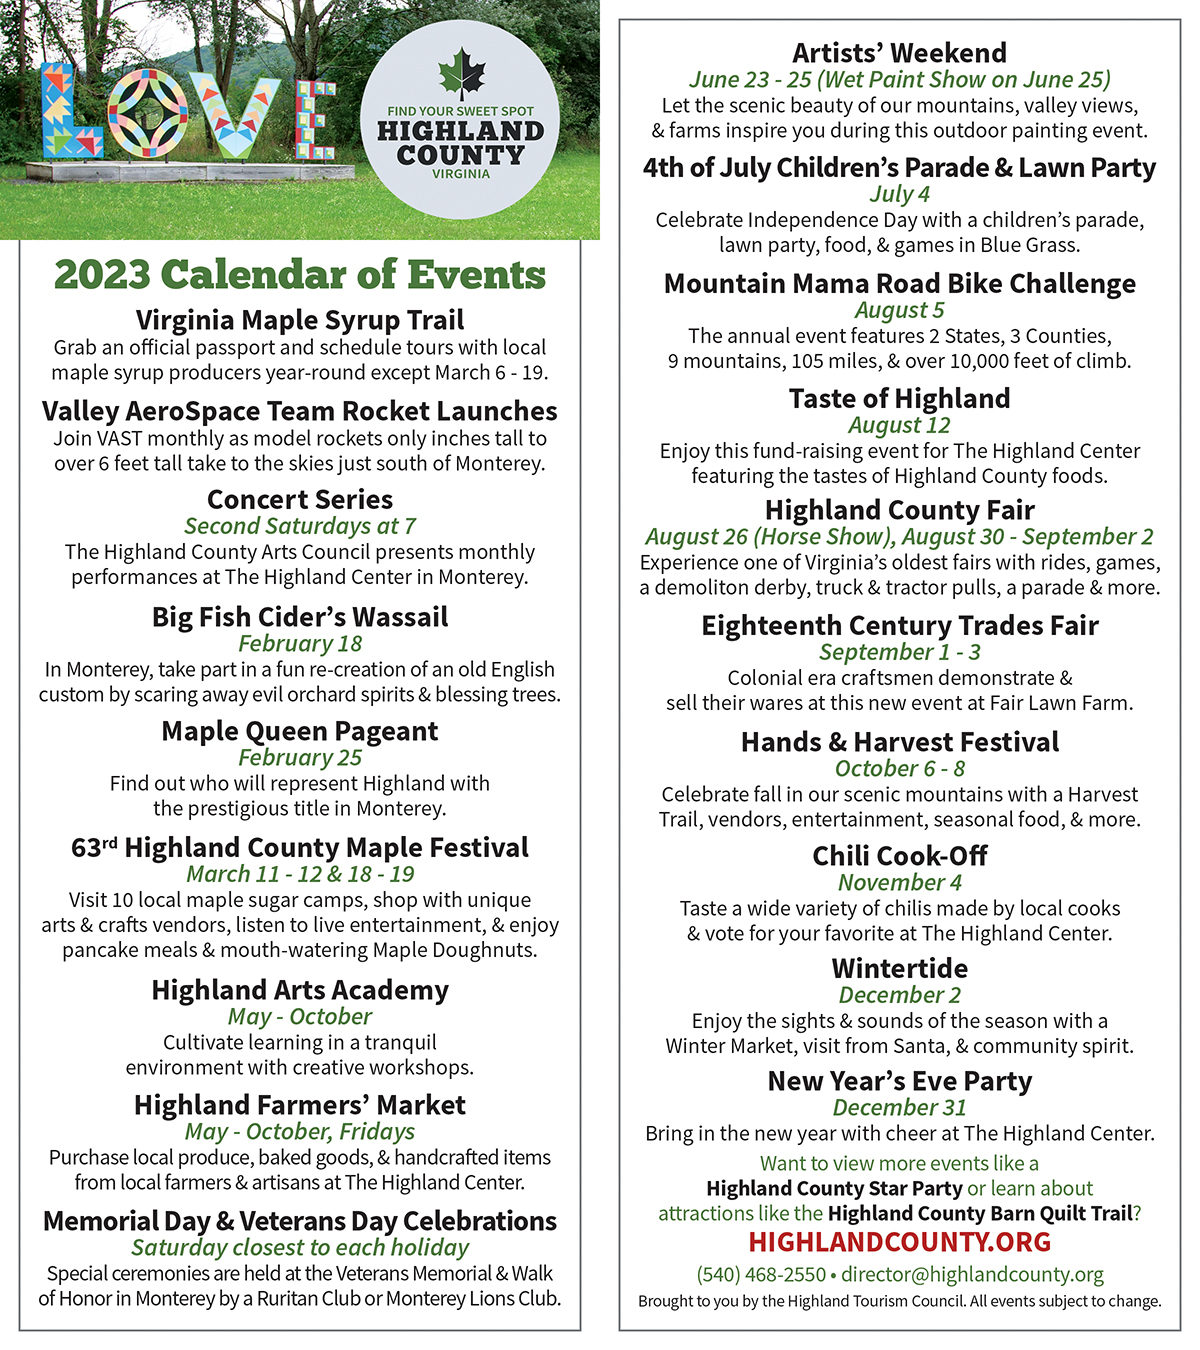 Community Events Calendar Highland County Chamber of Commerce